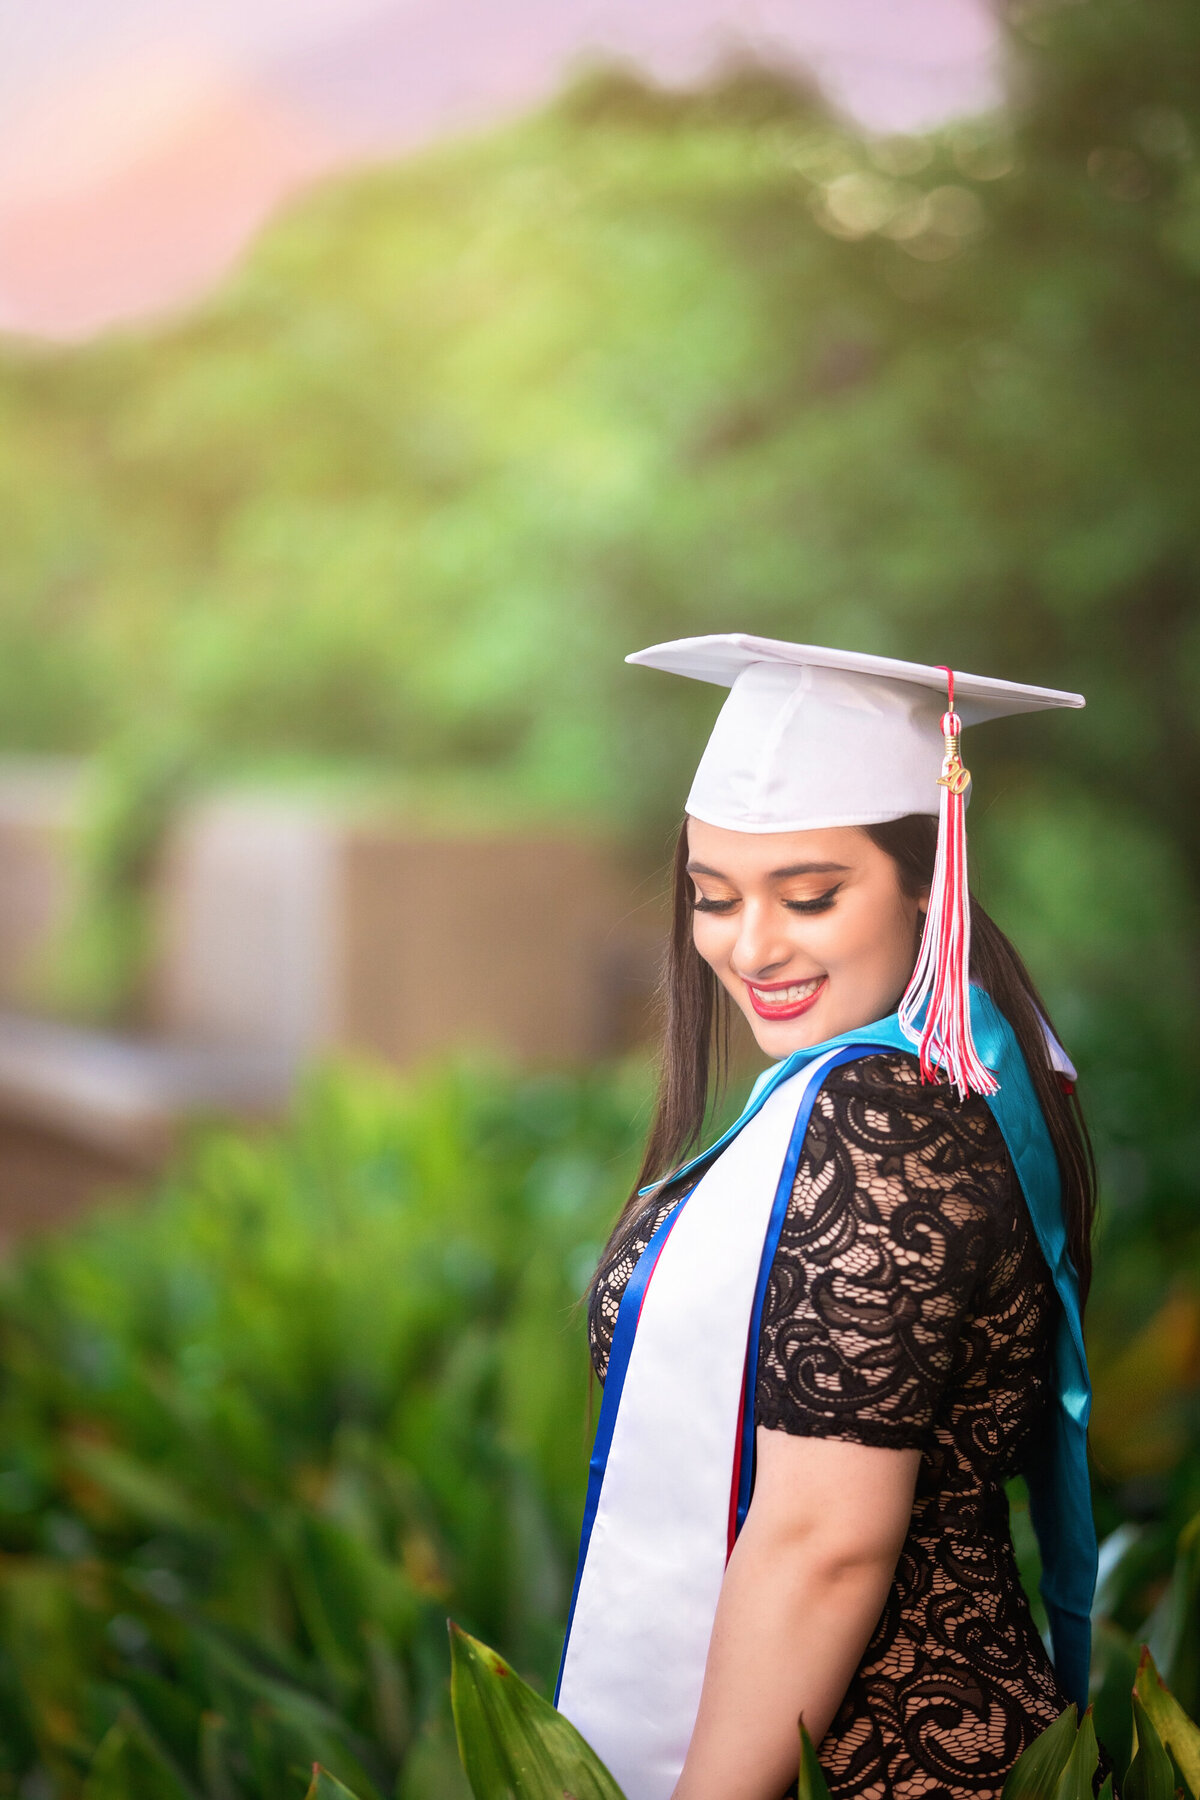 Senior female with cap and tassel wearing graduation sashes.  She is looking sideways over her shoulder and wearing a black lace dress.  There is a pink sunset in the distance.